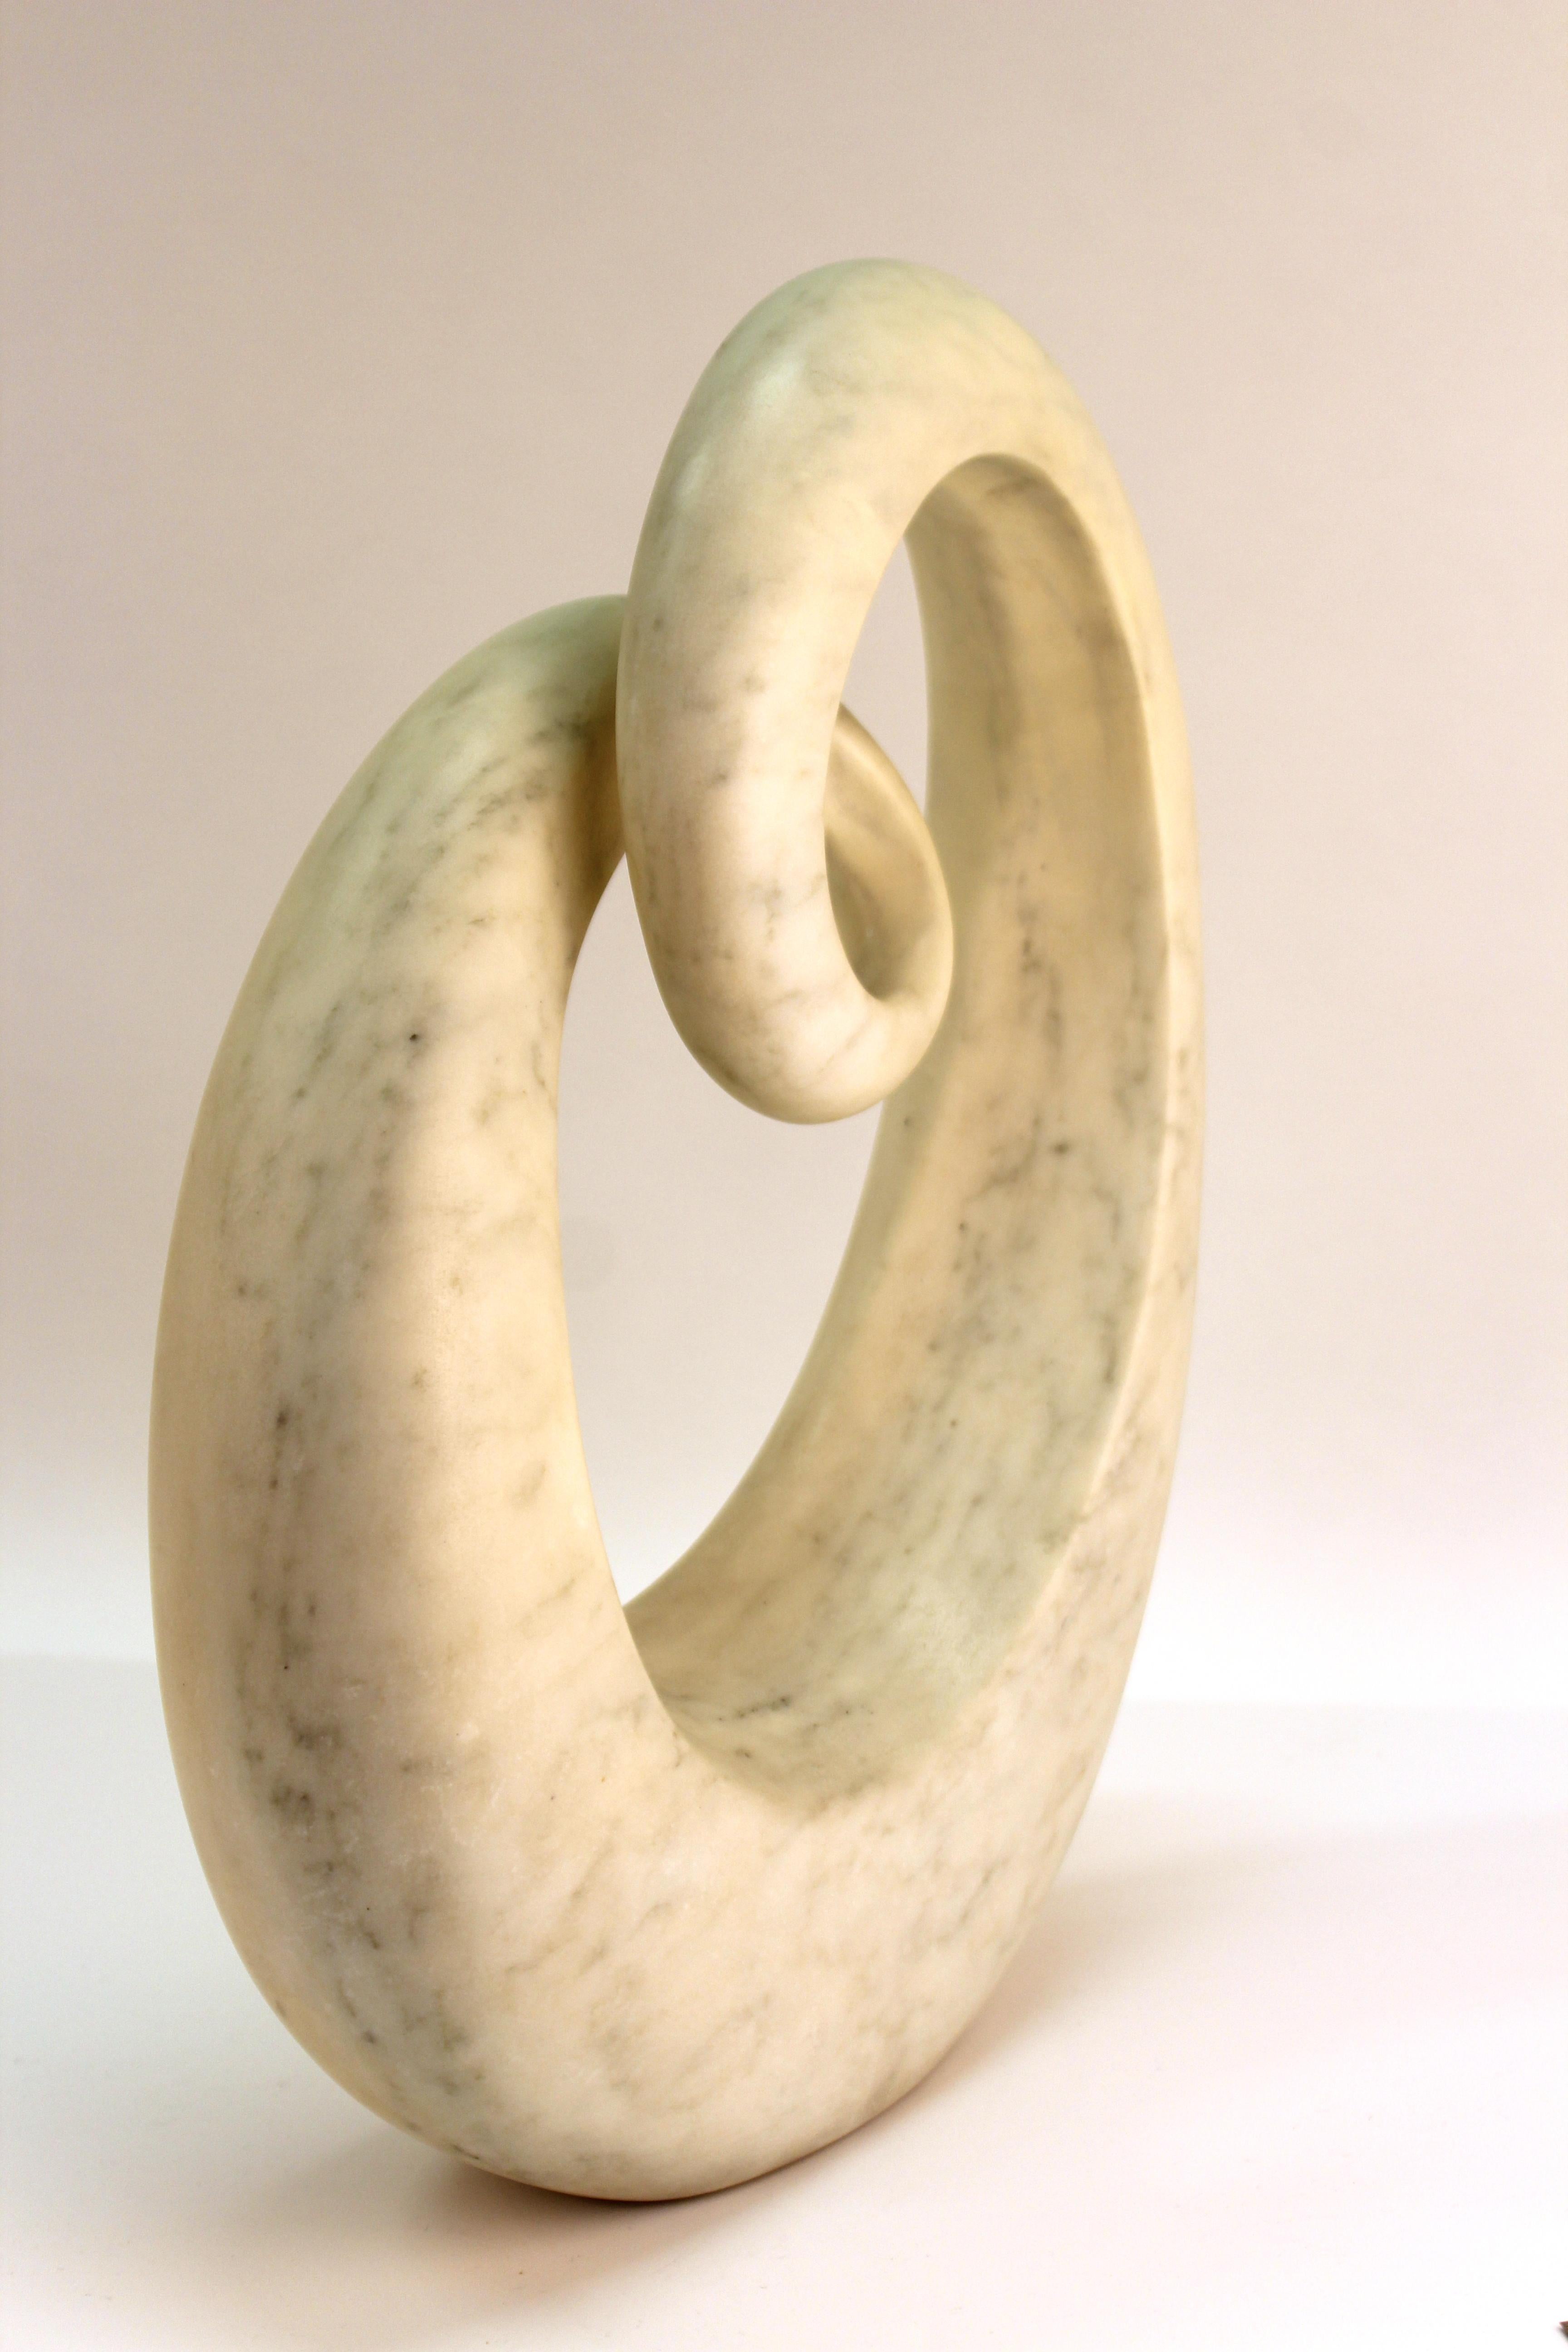 Modern abstract marble 'Infinity' sculpture by American artist Renzo Palmerini. The piece likely dates from the late 20th century, has an incised signature on the back lower edge and is in great vintage condition.